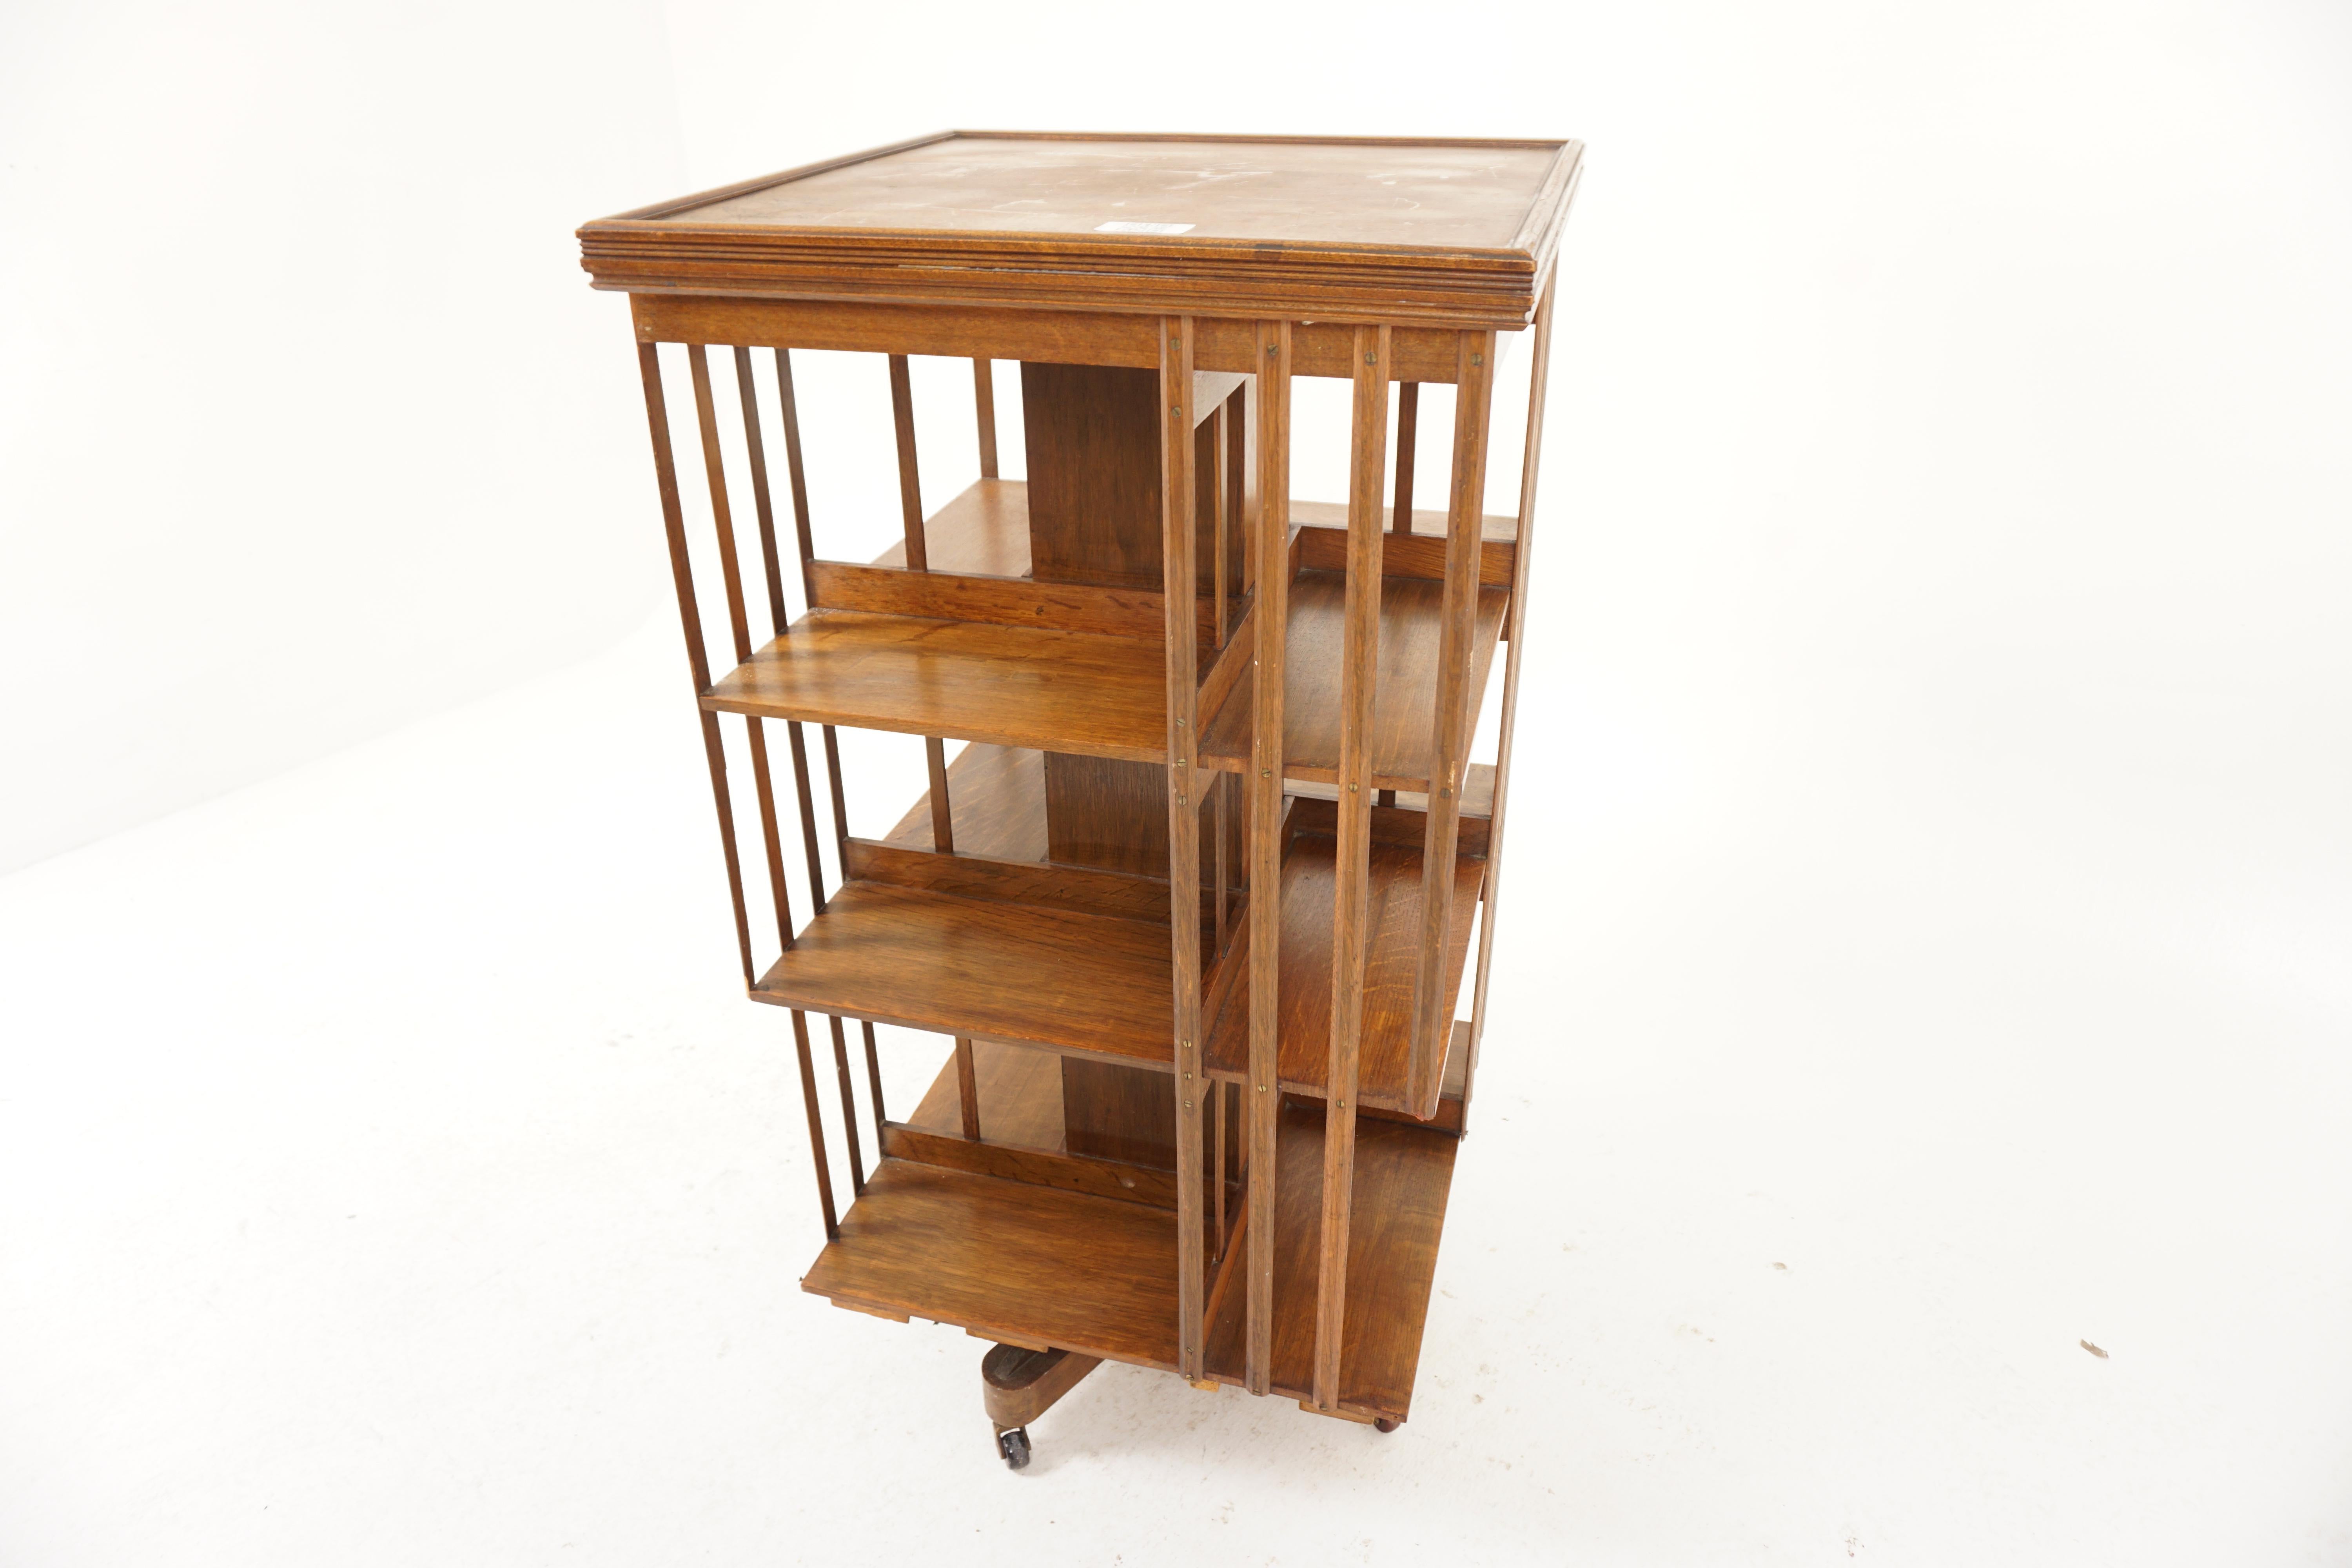 Antique Large Oak 3 Tier Revolving Bookcase 12 Section. Scotland 1900, H981

Scotland 1900
Solid Oak
Original finish
Square moulded top above three tiers (12 sections)
Raised up on a cruciform base with metal support
All raised on porcelain